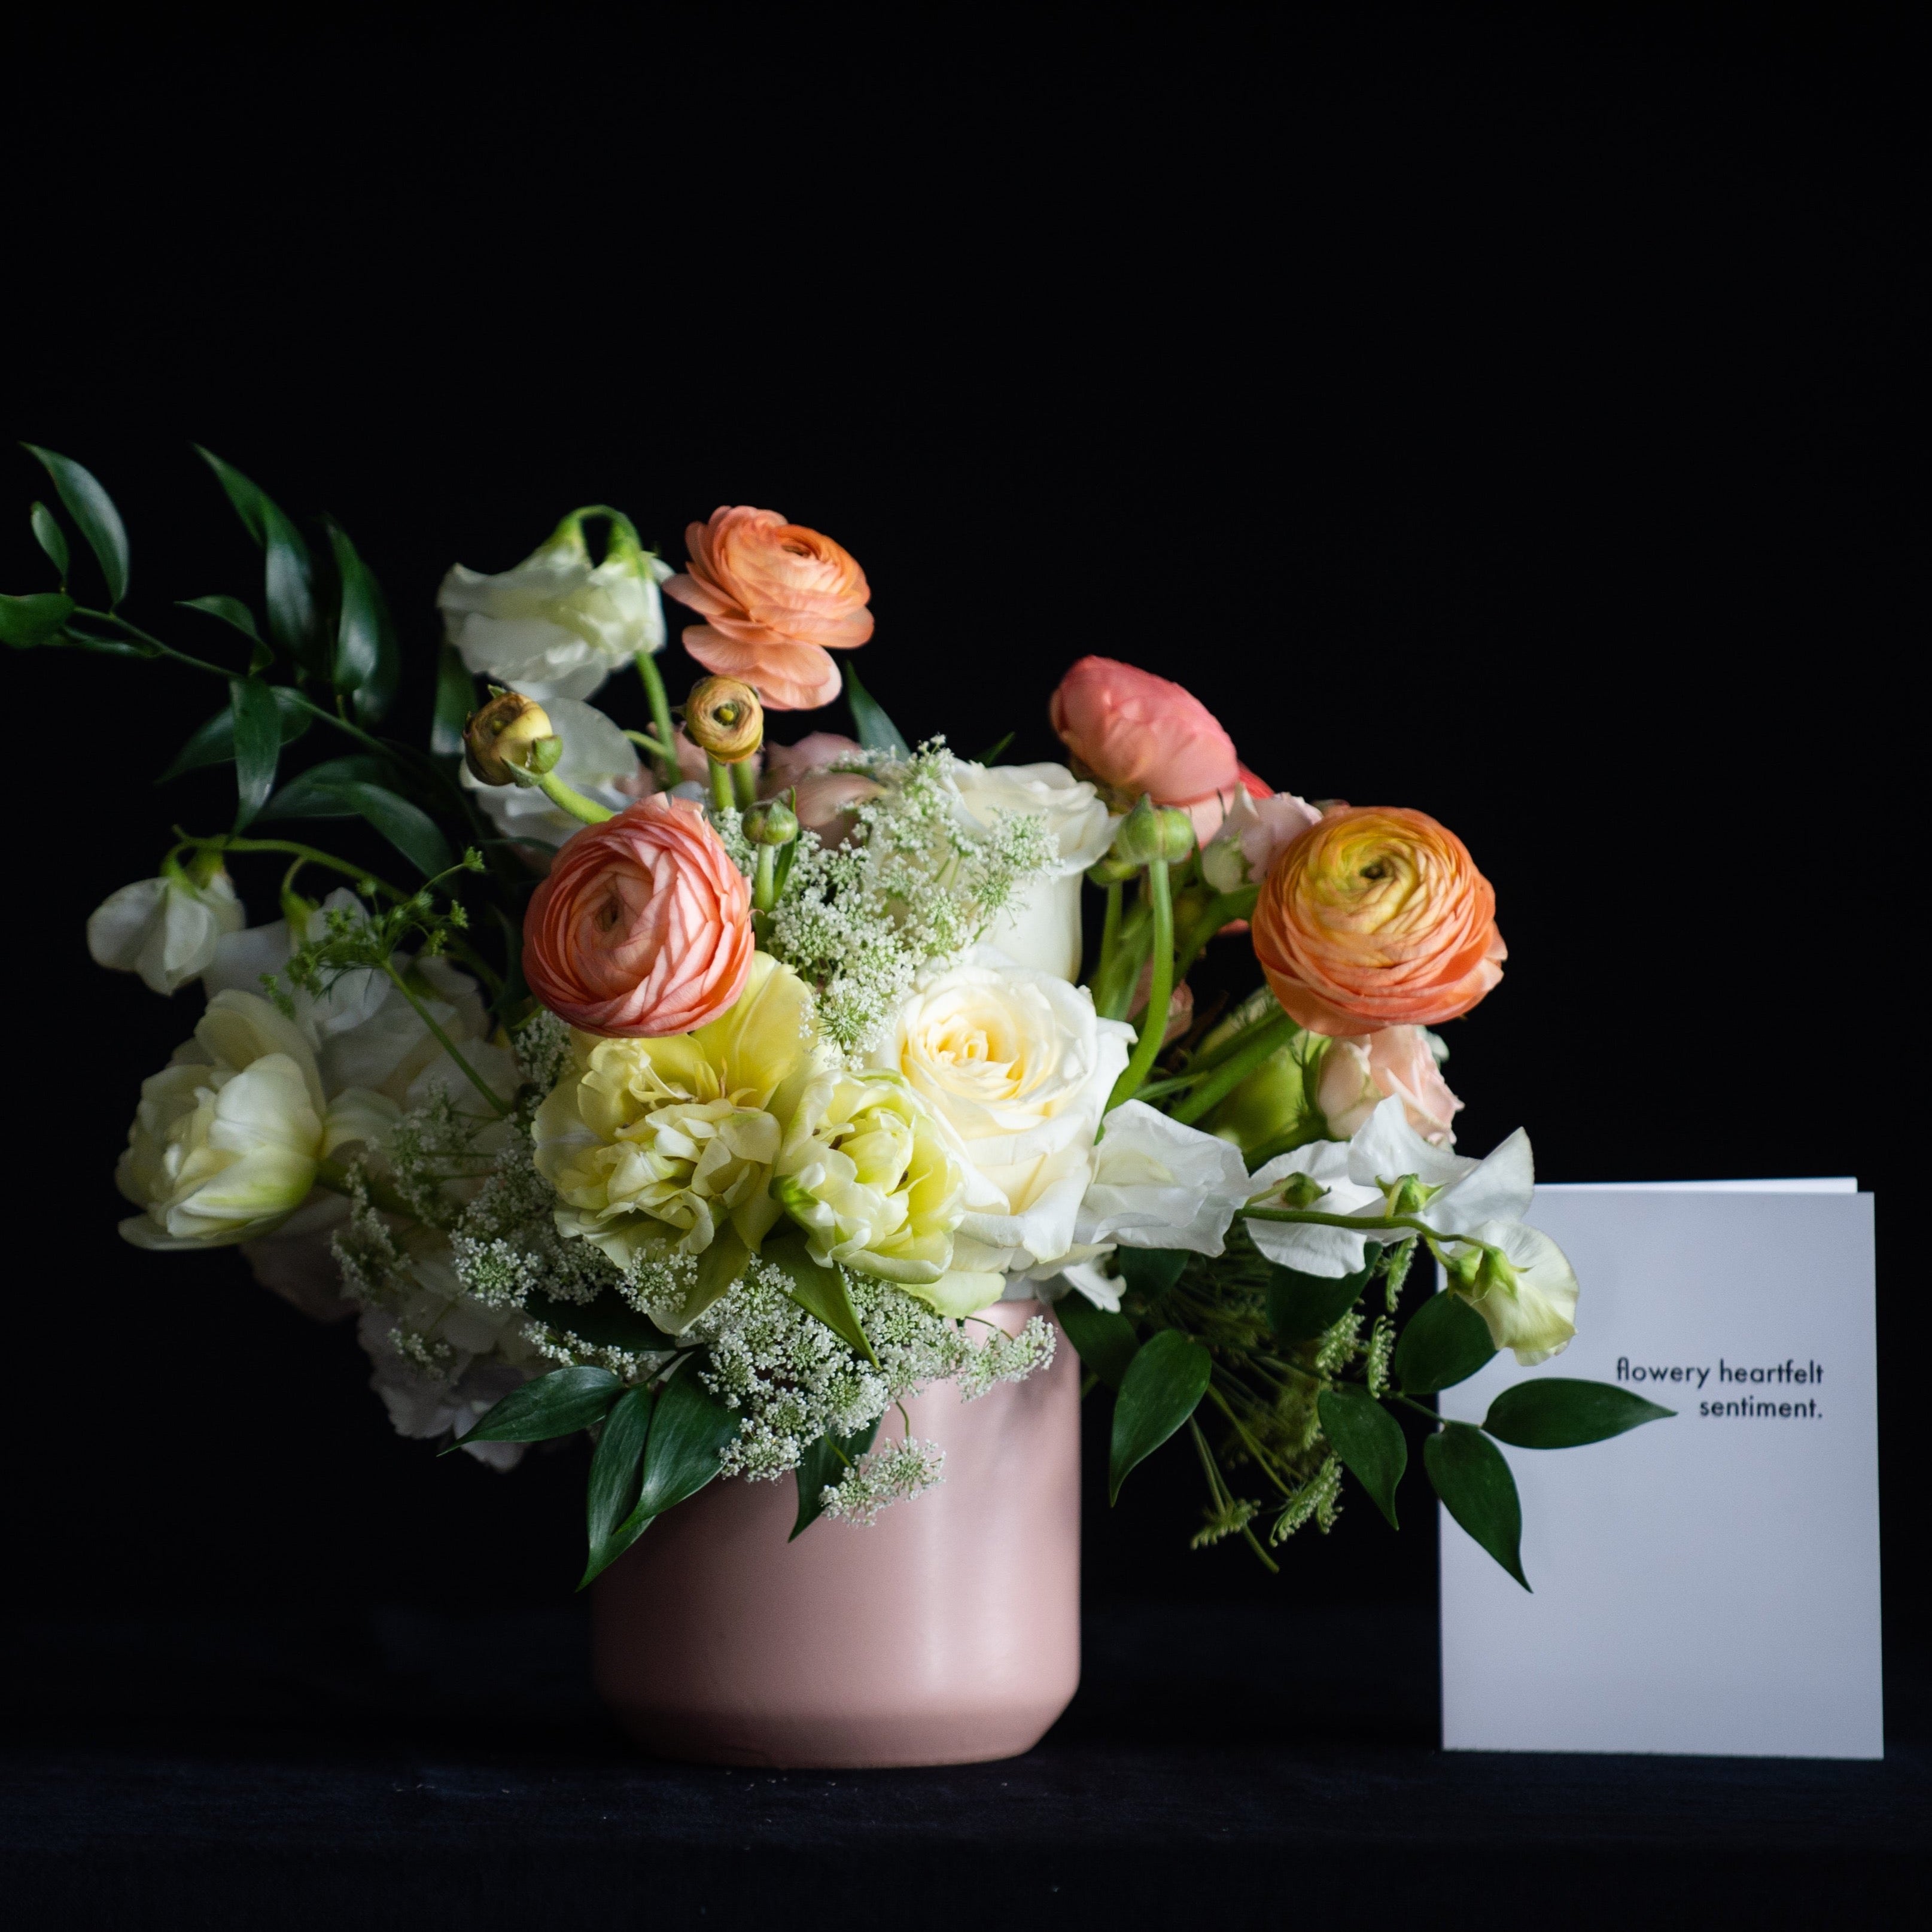 Ranunculus, tulips, hydrangea and roses for Mother's Day. 